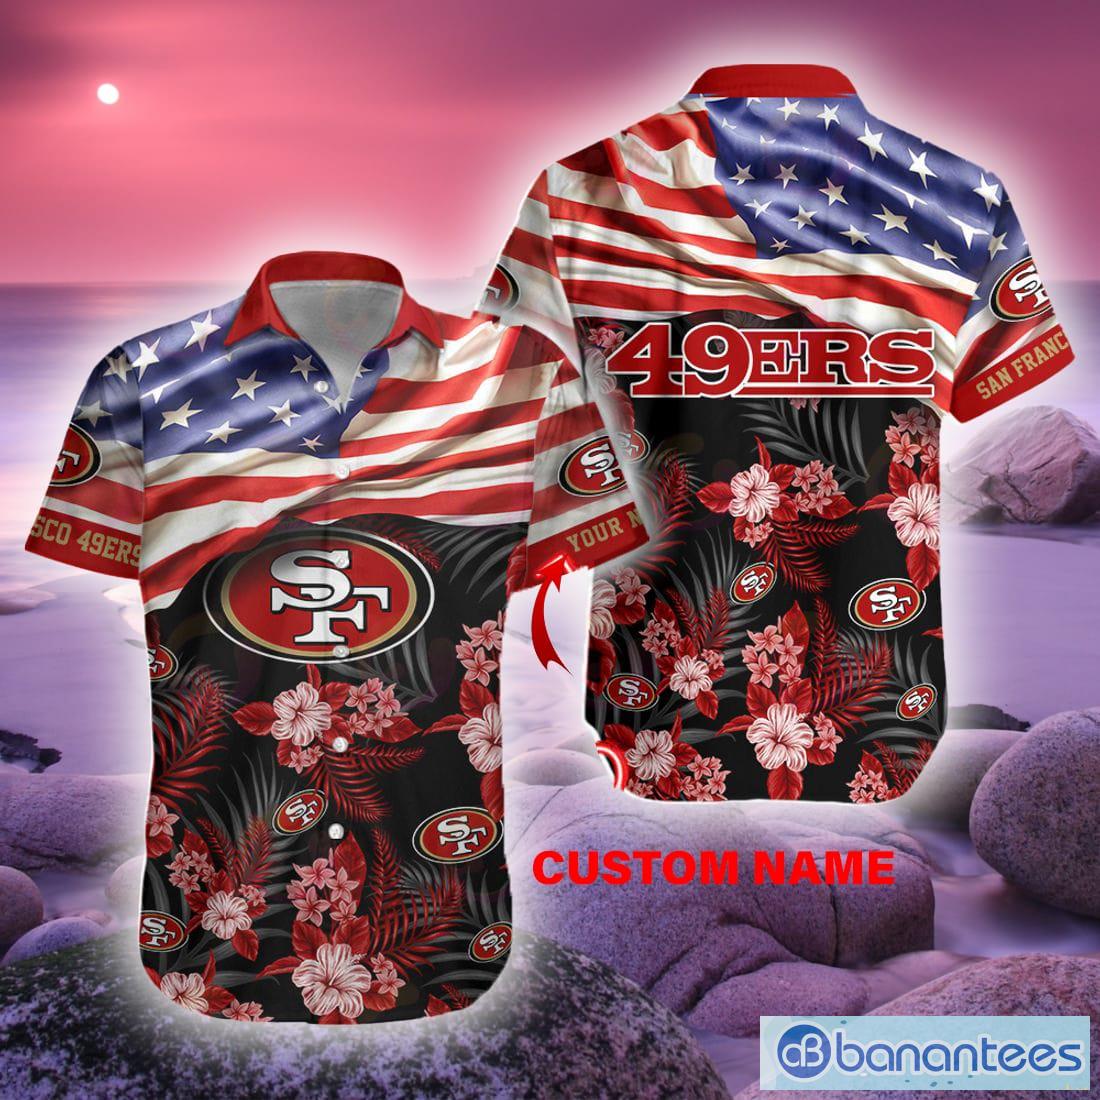 Personalized San Francisco 49ers Baseball Jersey Shirt For Fans